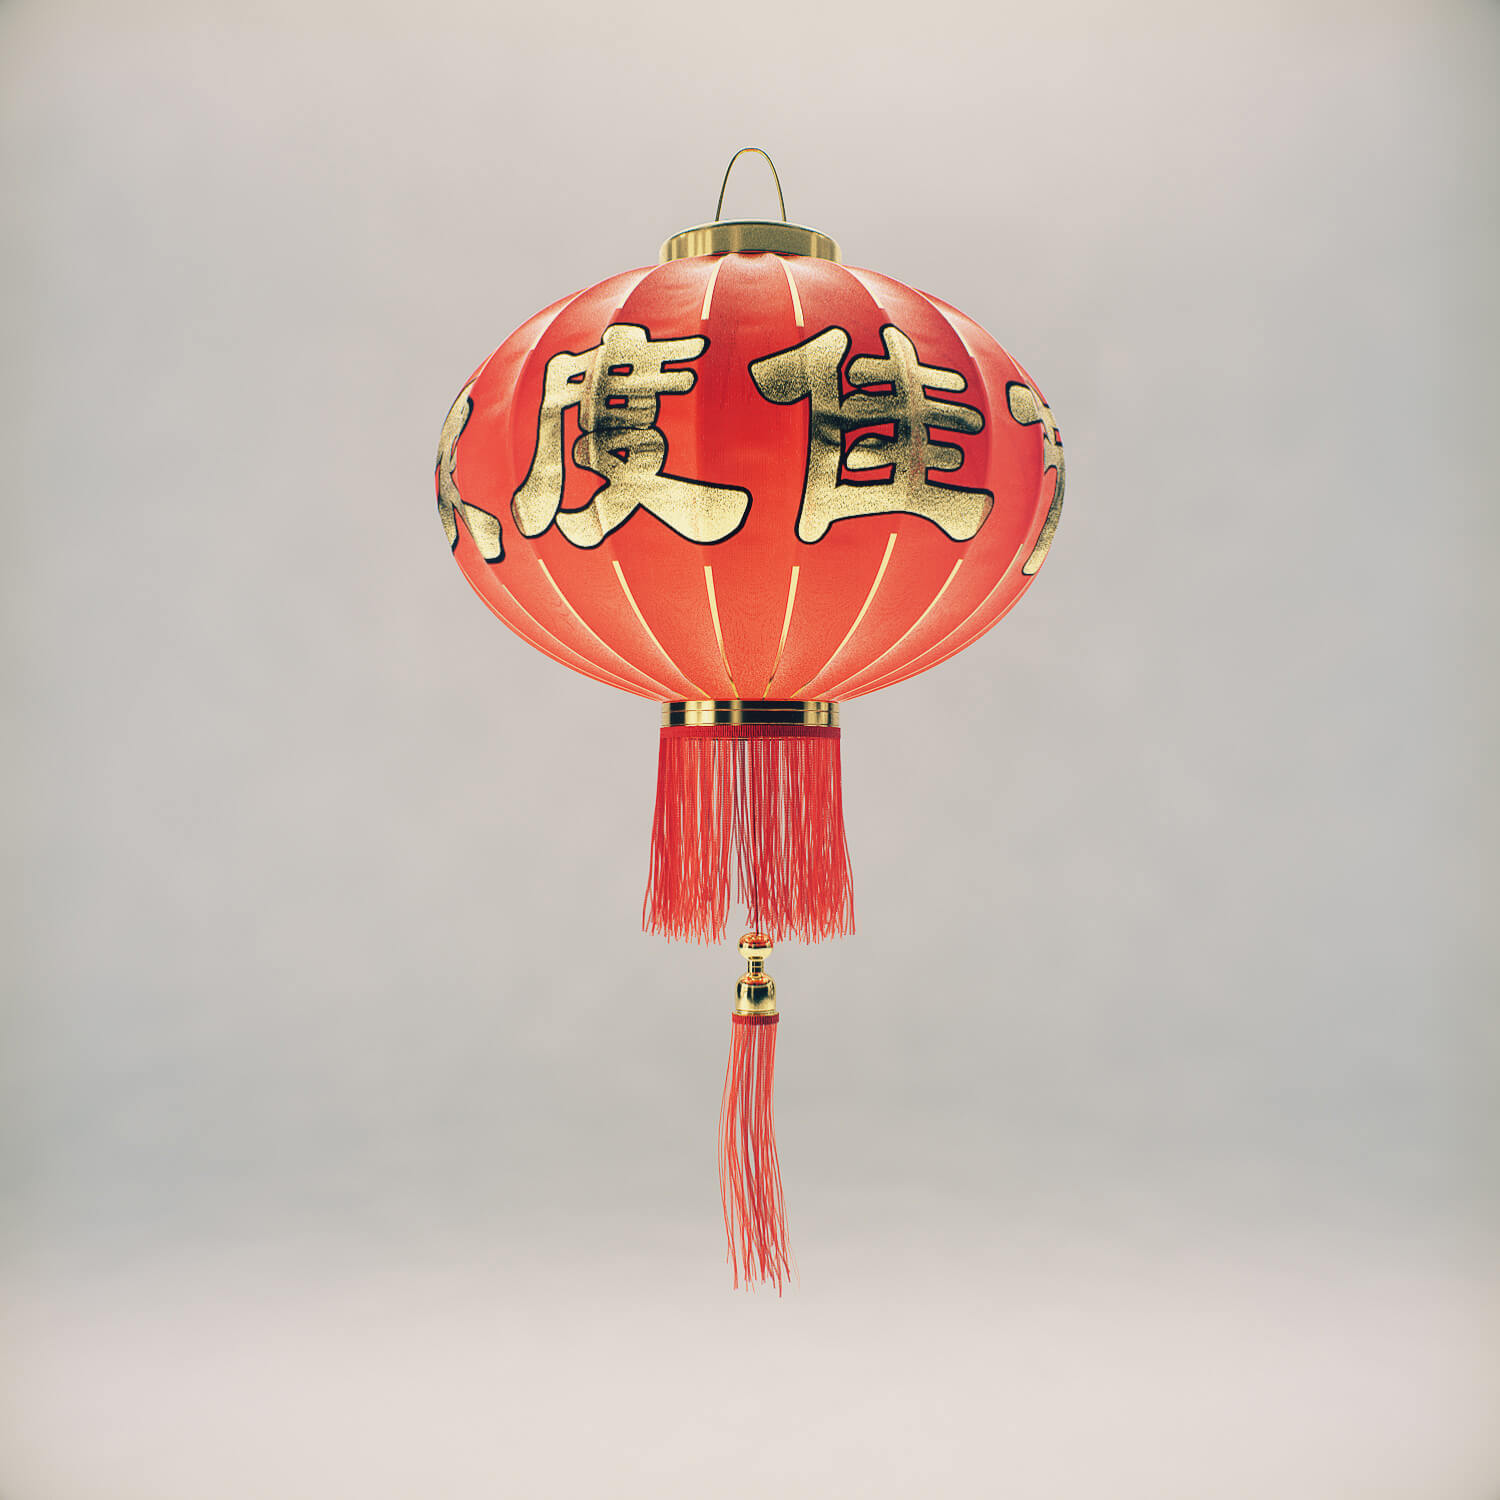 Free Cinema 4D 3D Model: Traditional Chinese Sky Lantern